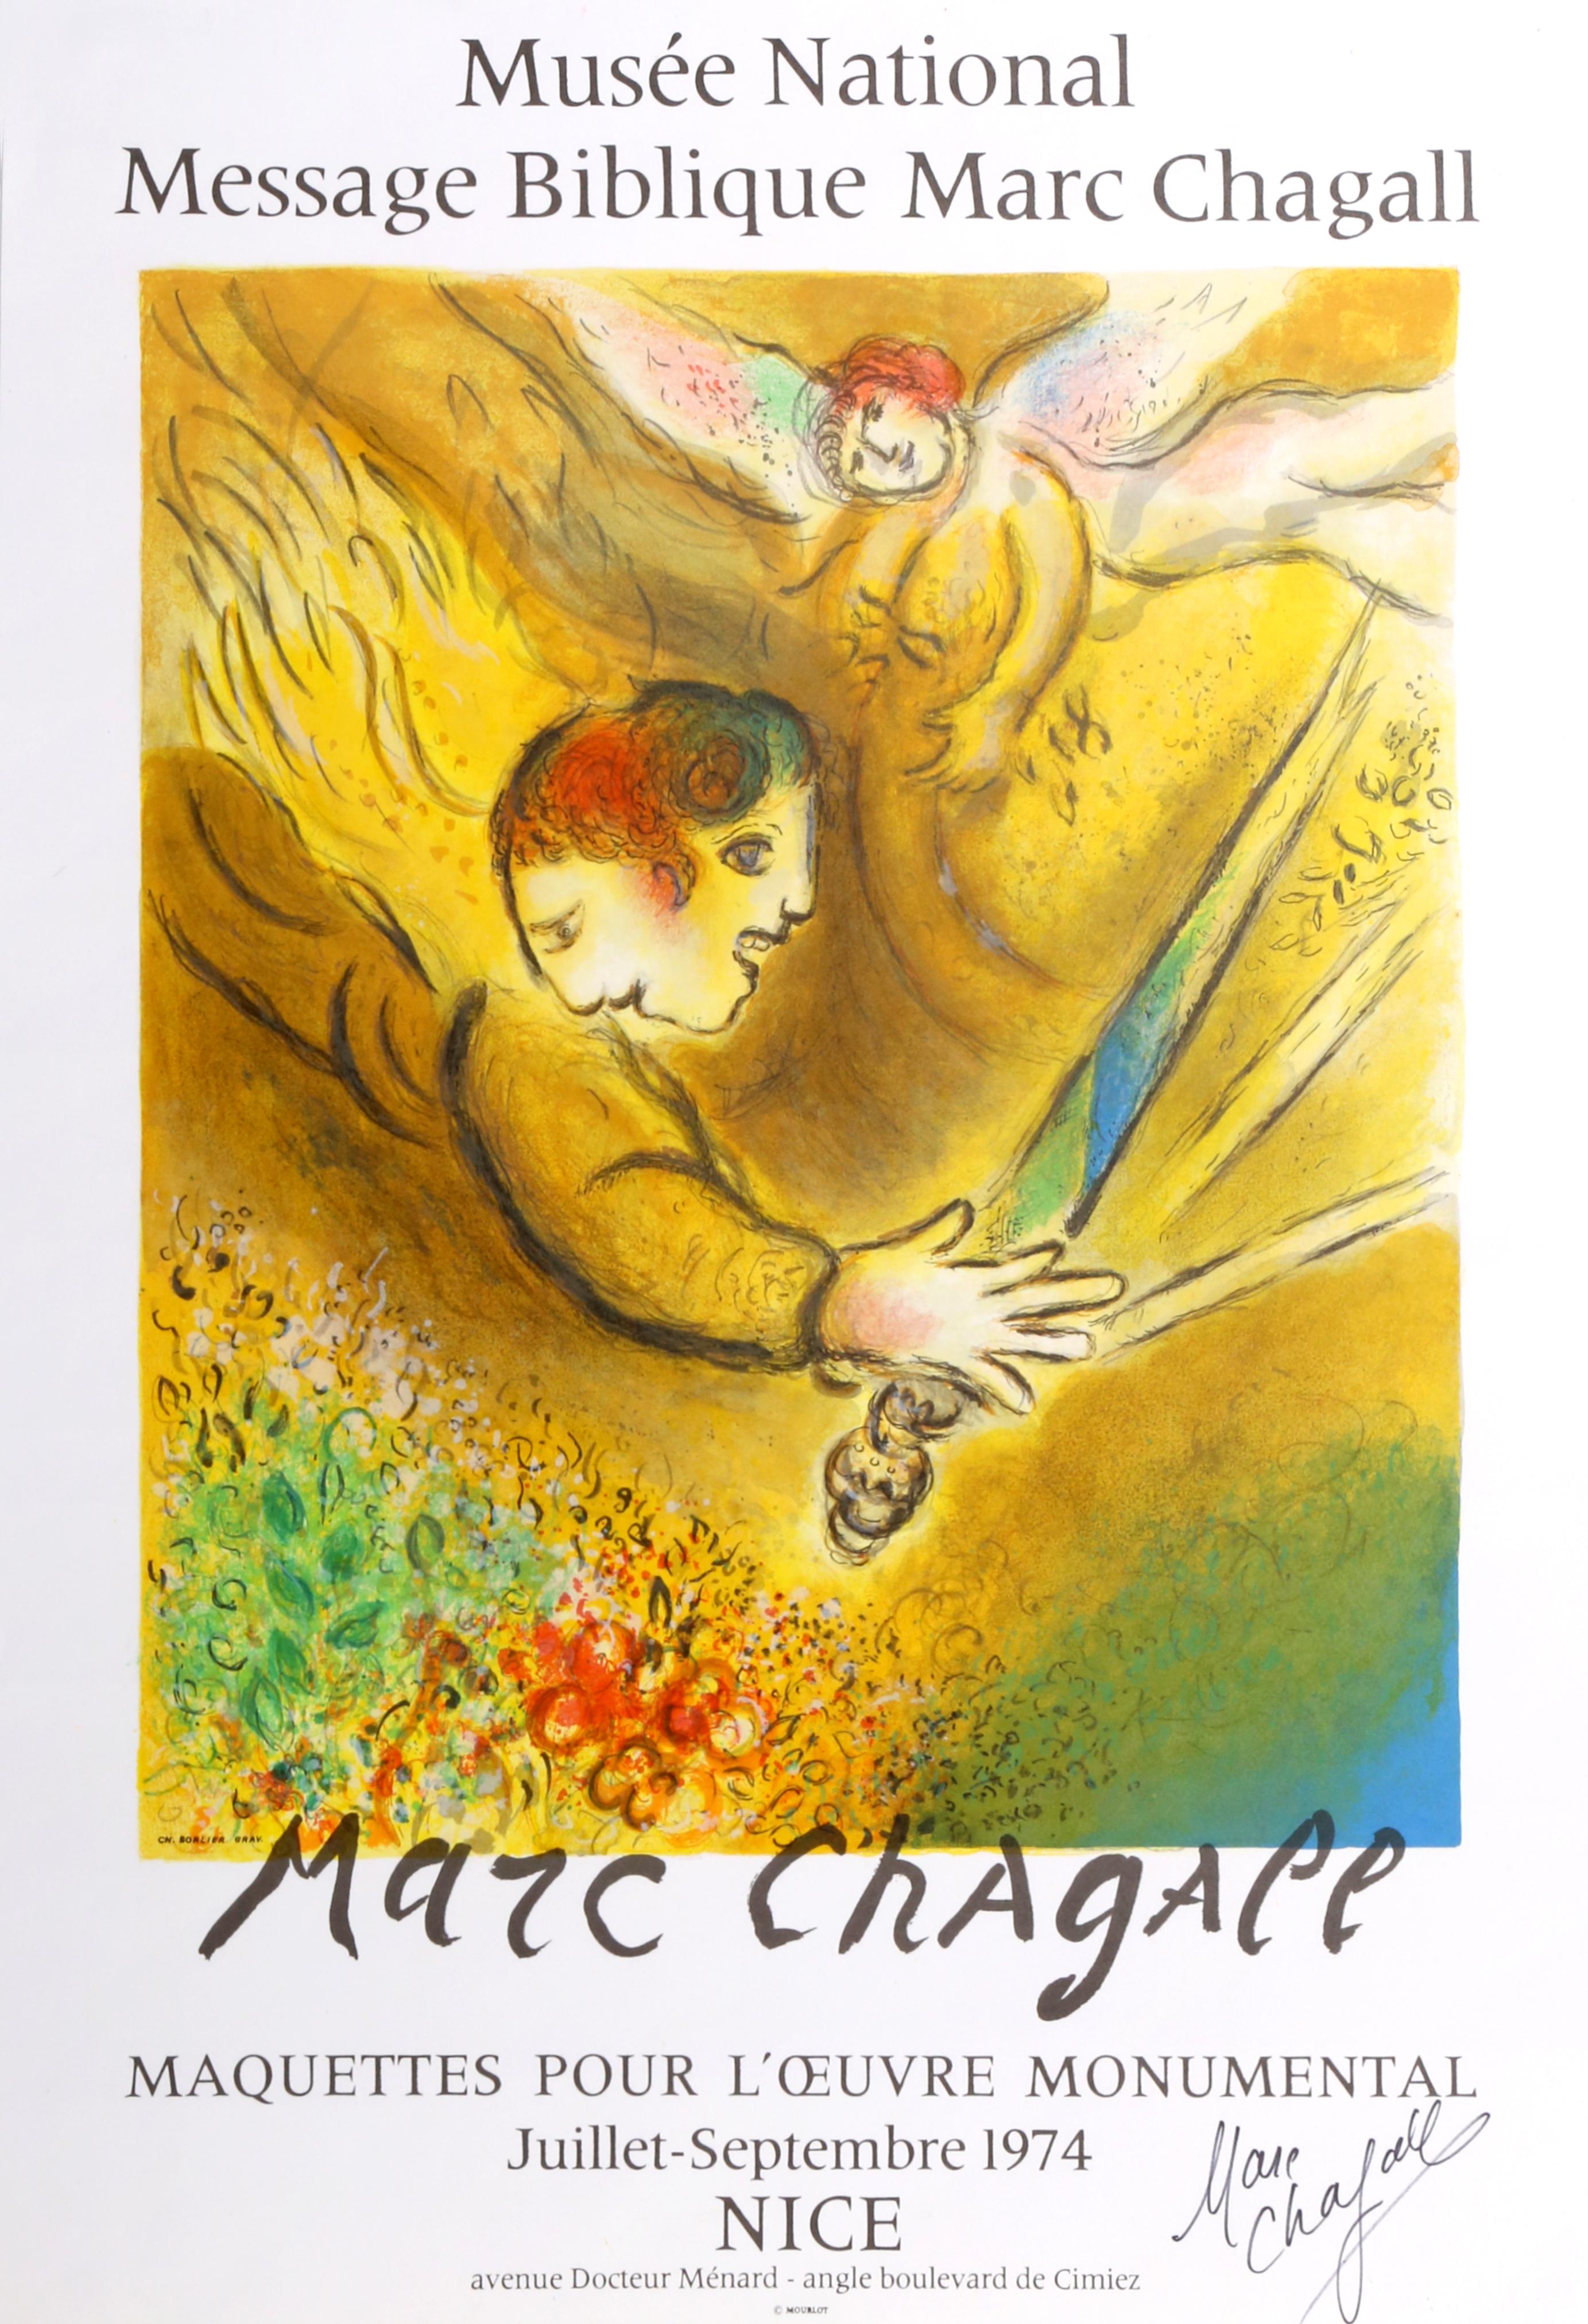 Marc Chagall Figurative Print - Musee National, Message Biblique, The Angel of Judgment, Lithogaph by Chagall